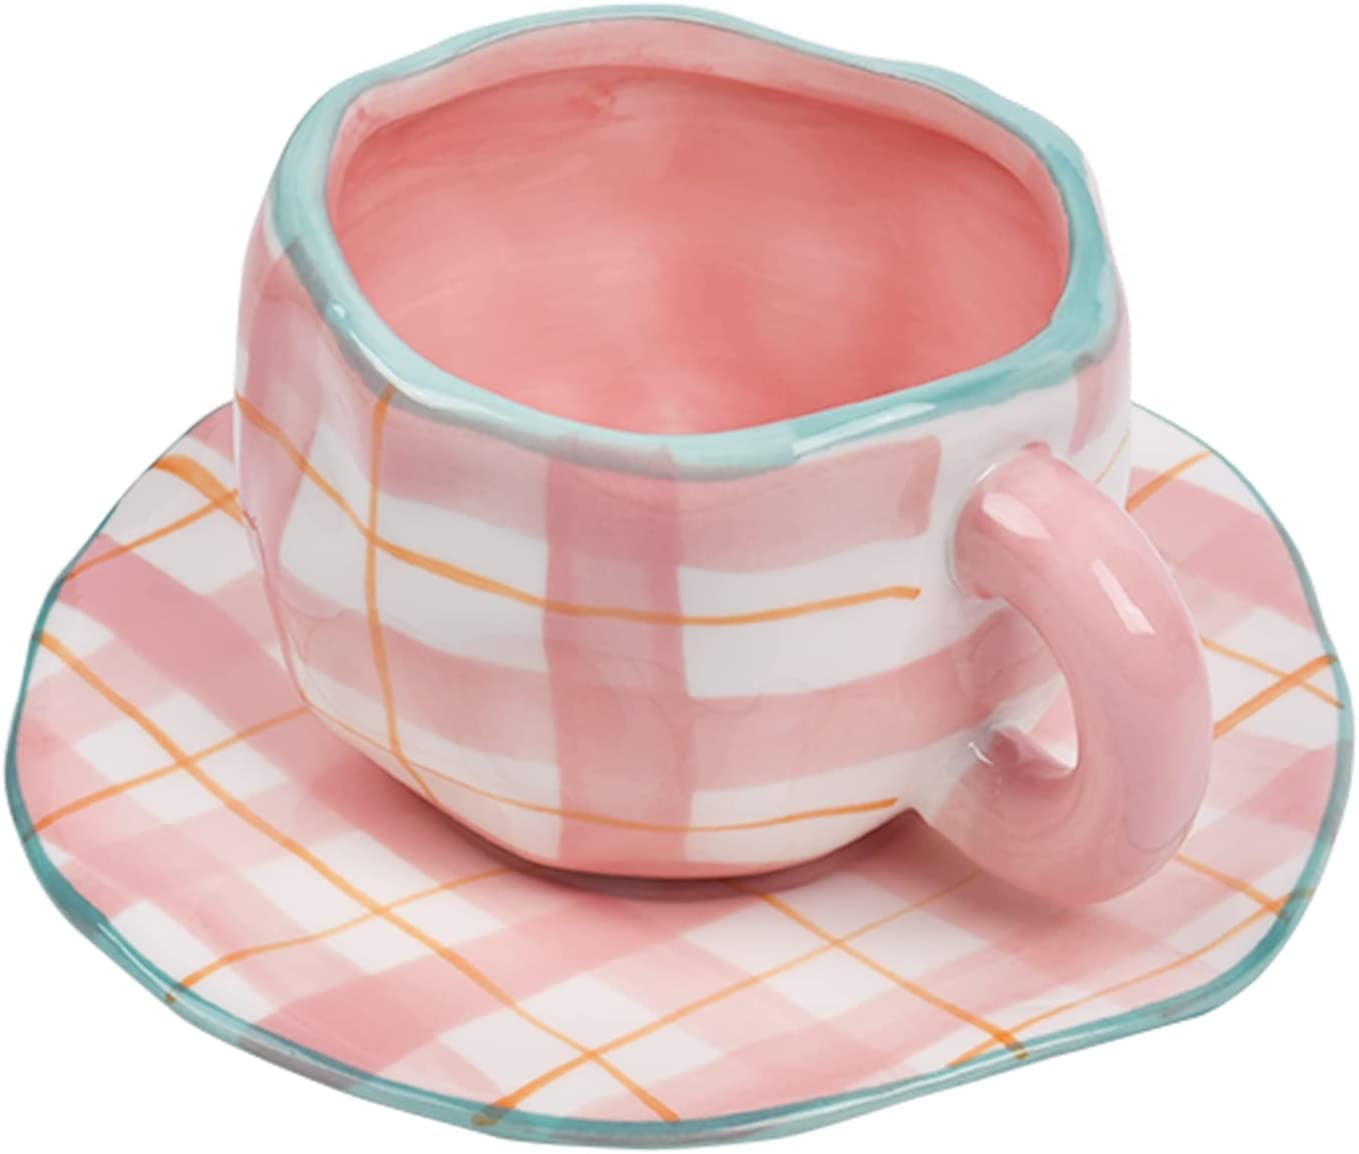 JLMMEN STORE Ceramic Coffee Mug, Cute Pink Cup for Women with